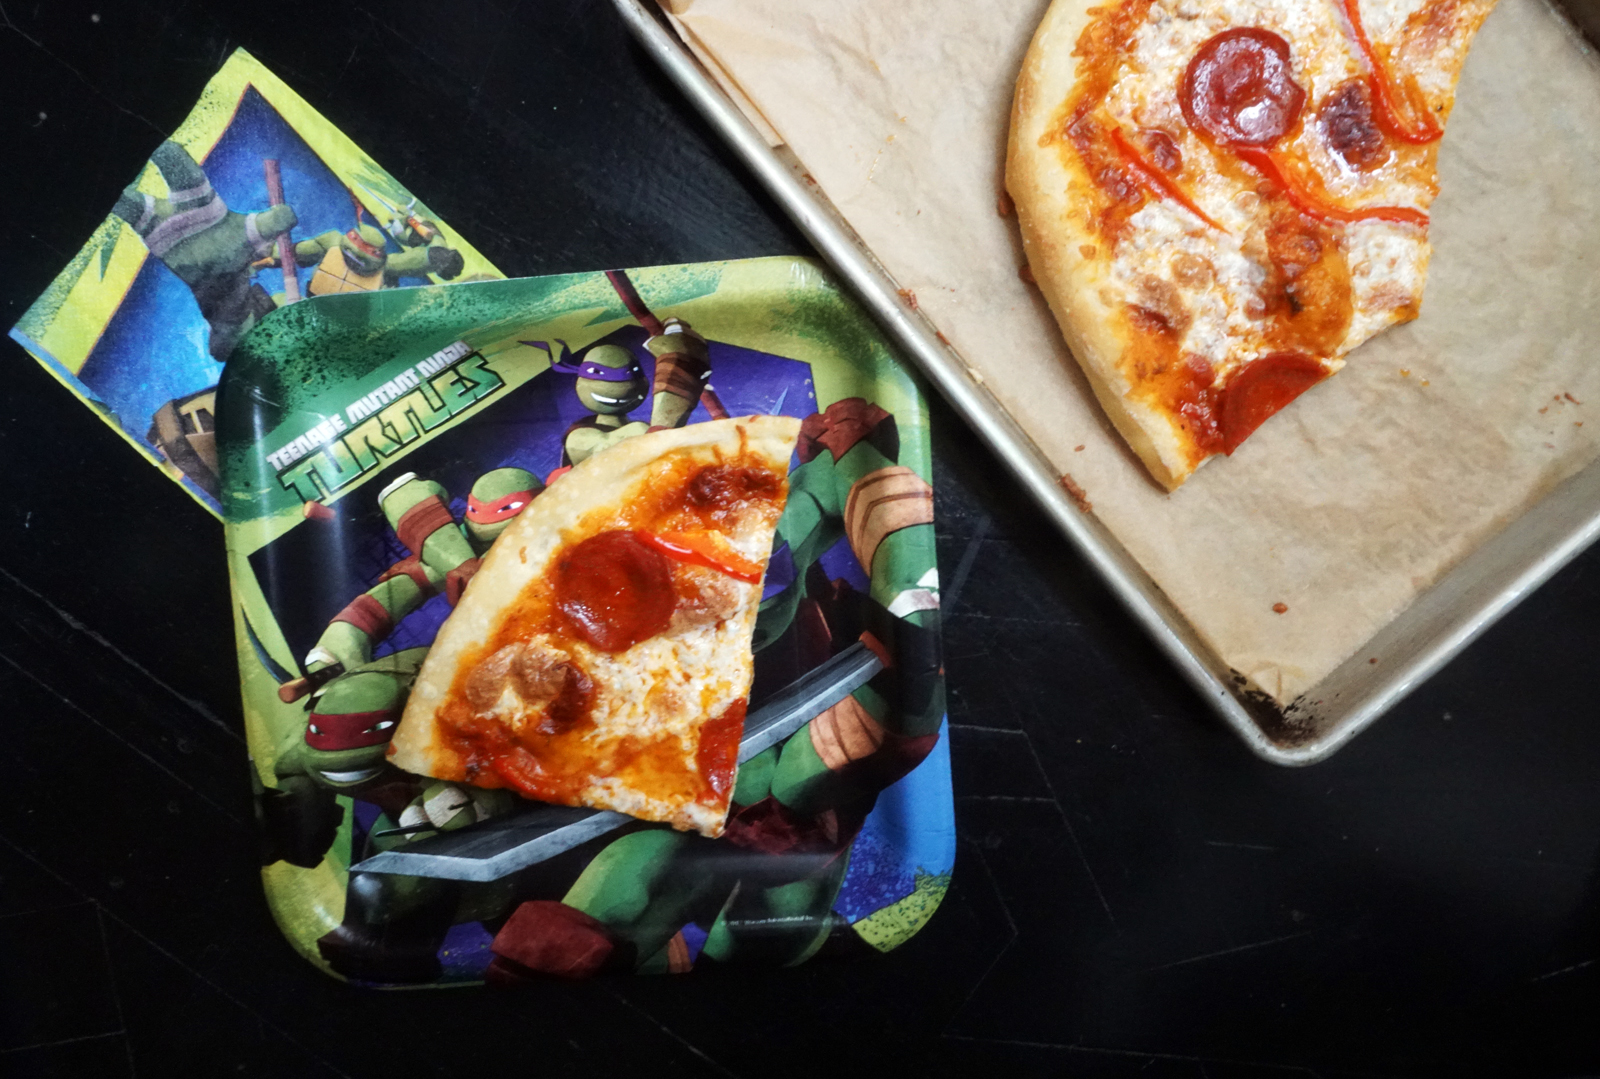 25 creative pizza topping ideas for your next DIY pizza party for kids! We had a Teenage Mutant Ninja Turtle viewing party - so fun! | Cool Mom Eats [sponsor]